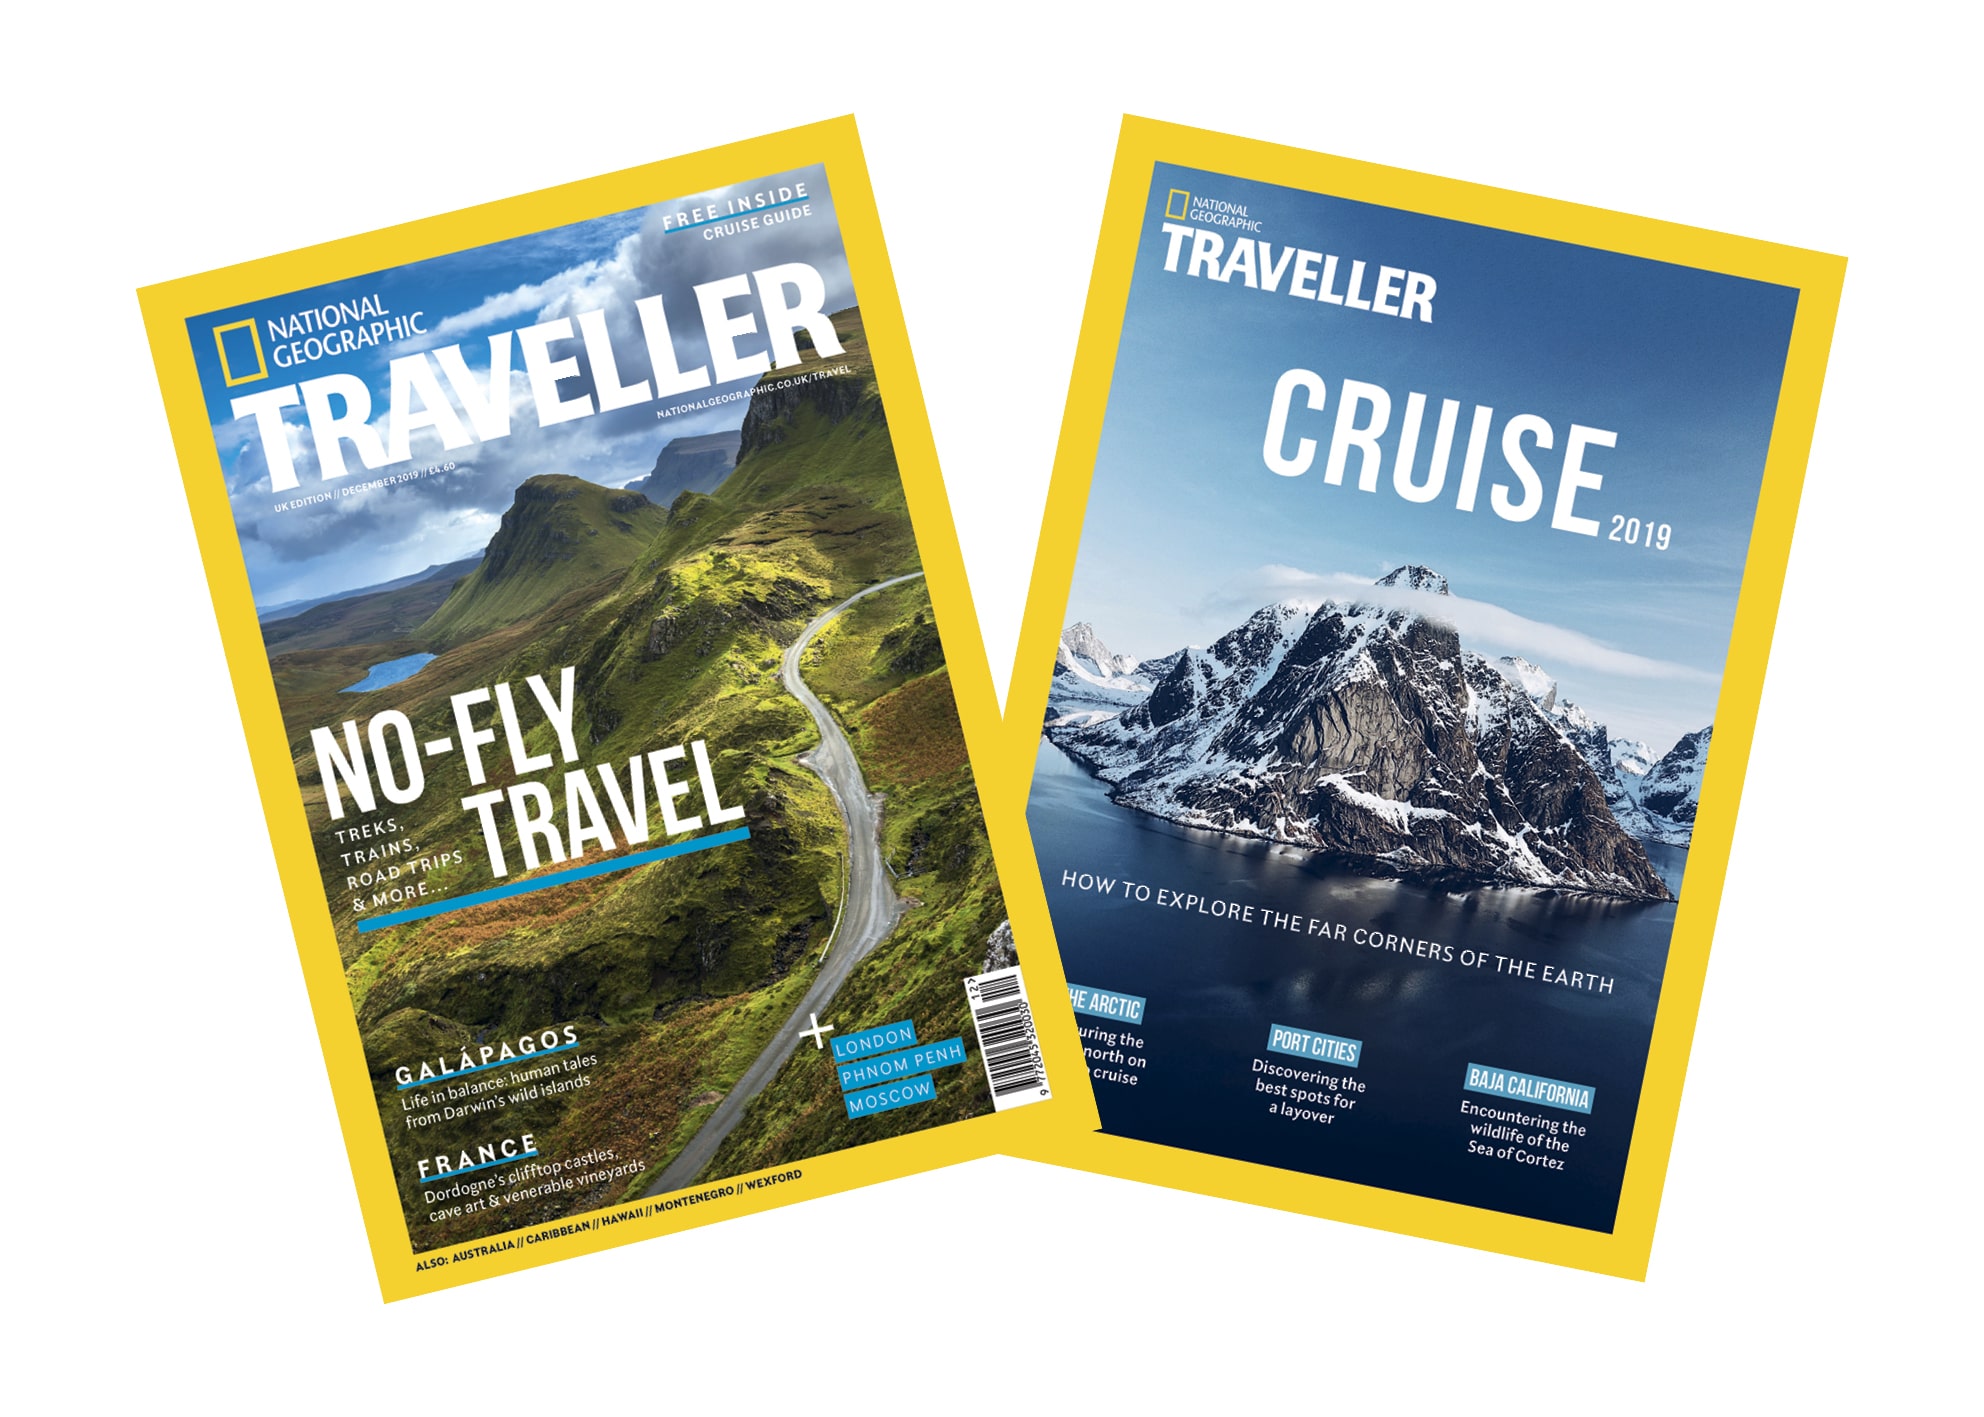 National Geographic Traveller (UK) December issue and Cruise guide covers.